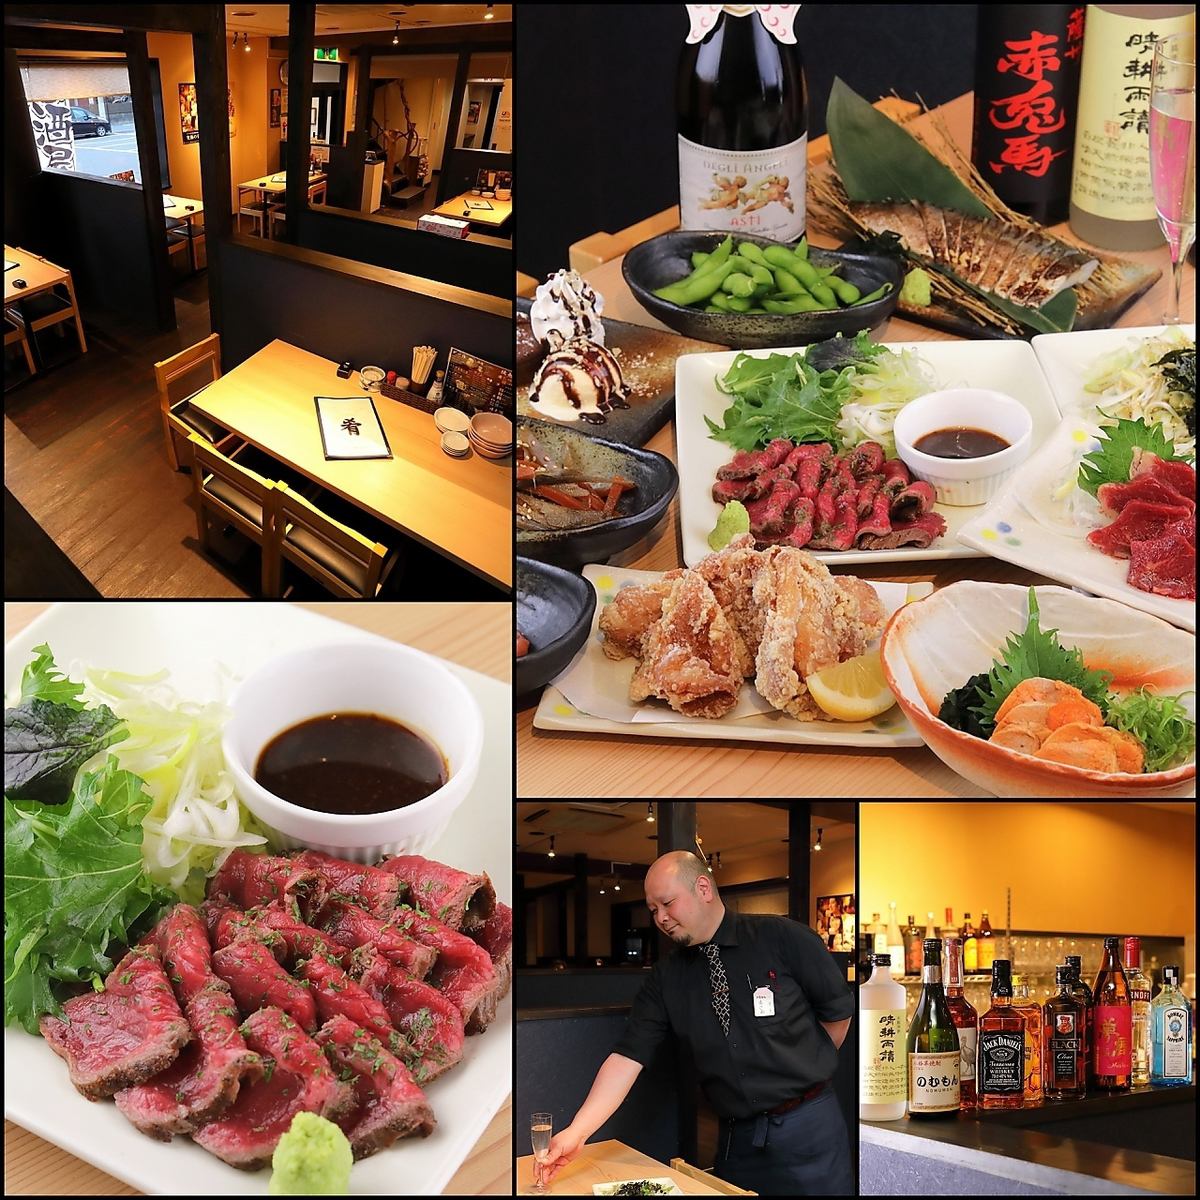 “Nomumon” is a place where you can enjoy delicious dishes and liquors at reasonable prices!